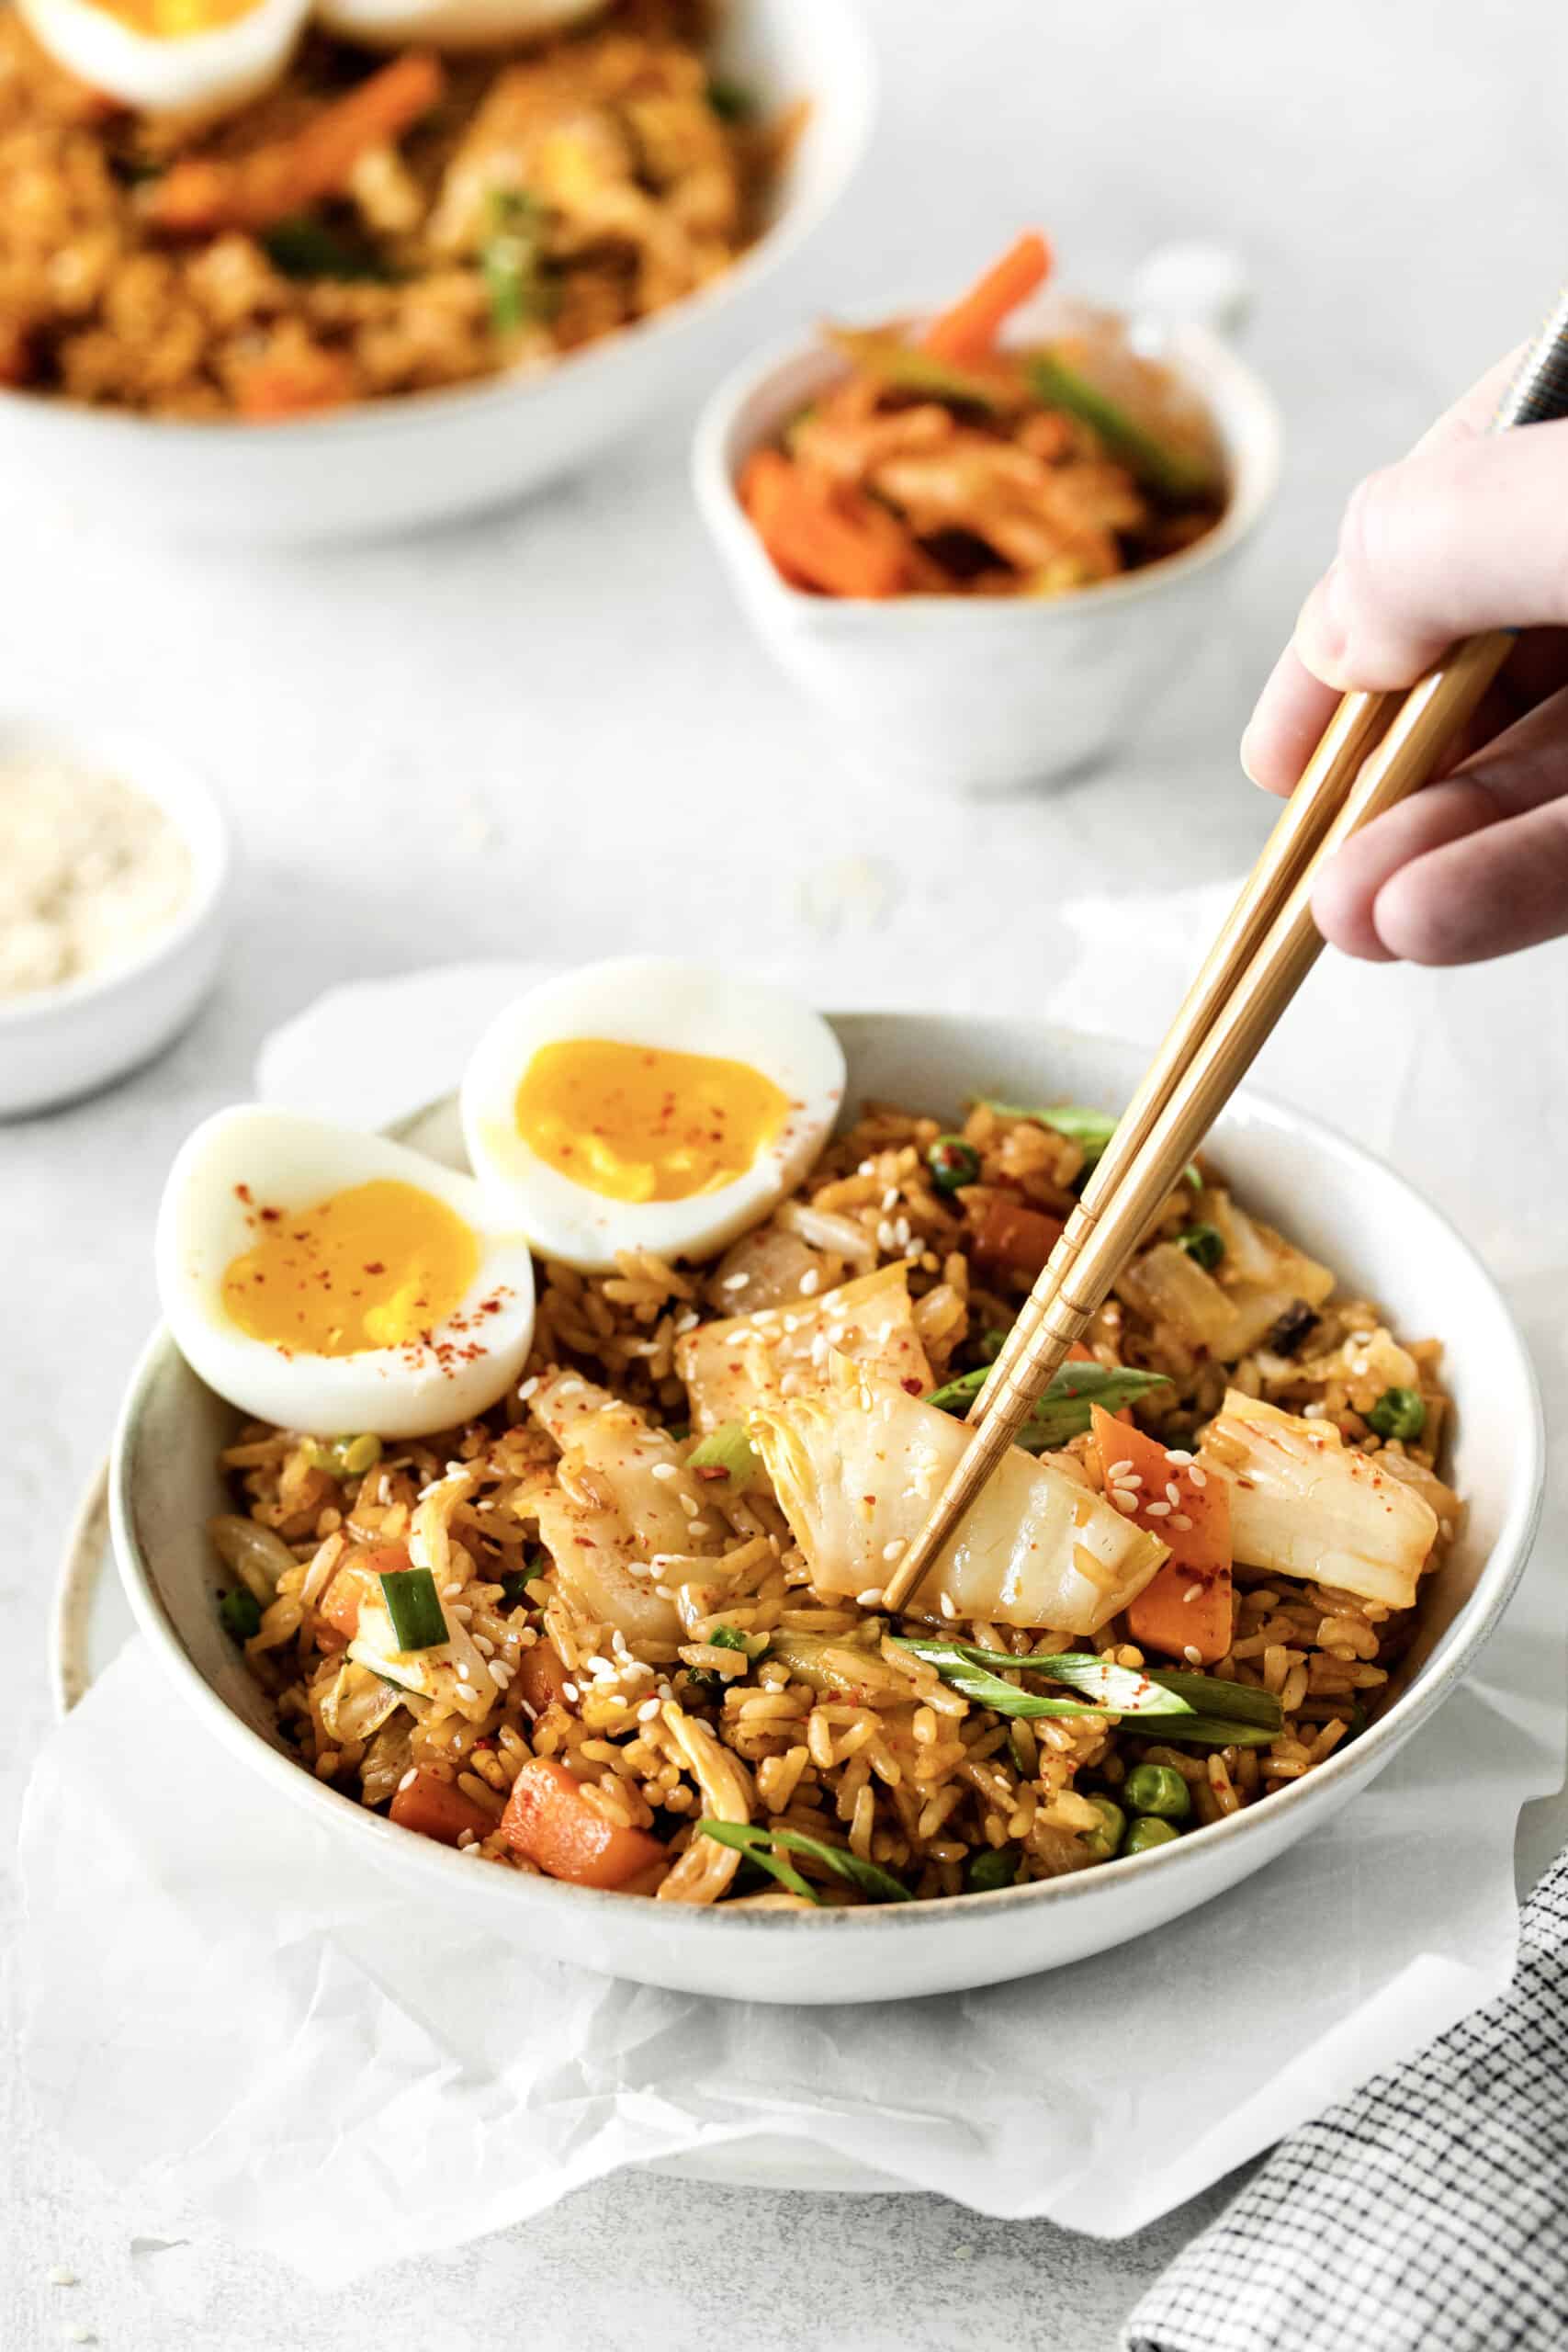 Chopsticks digging in to a bowl of kimchi fried rice